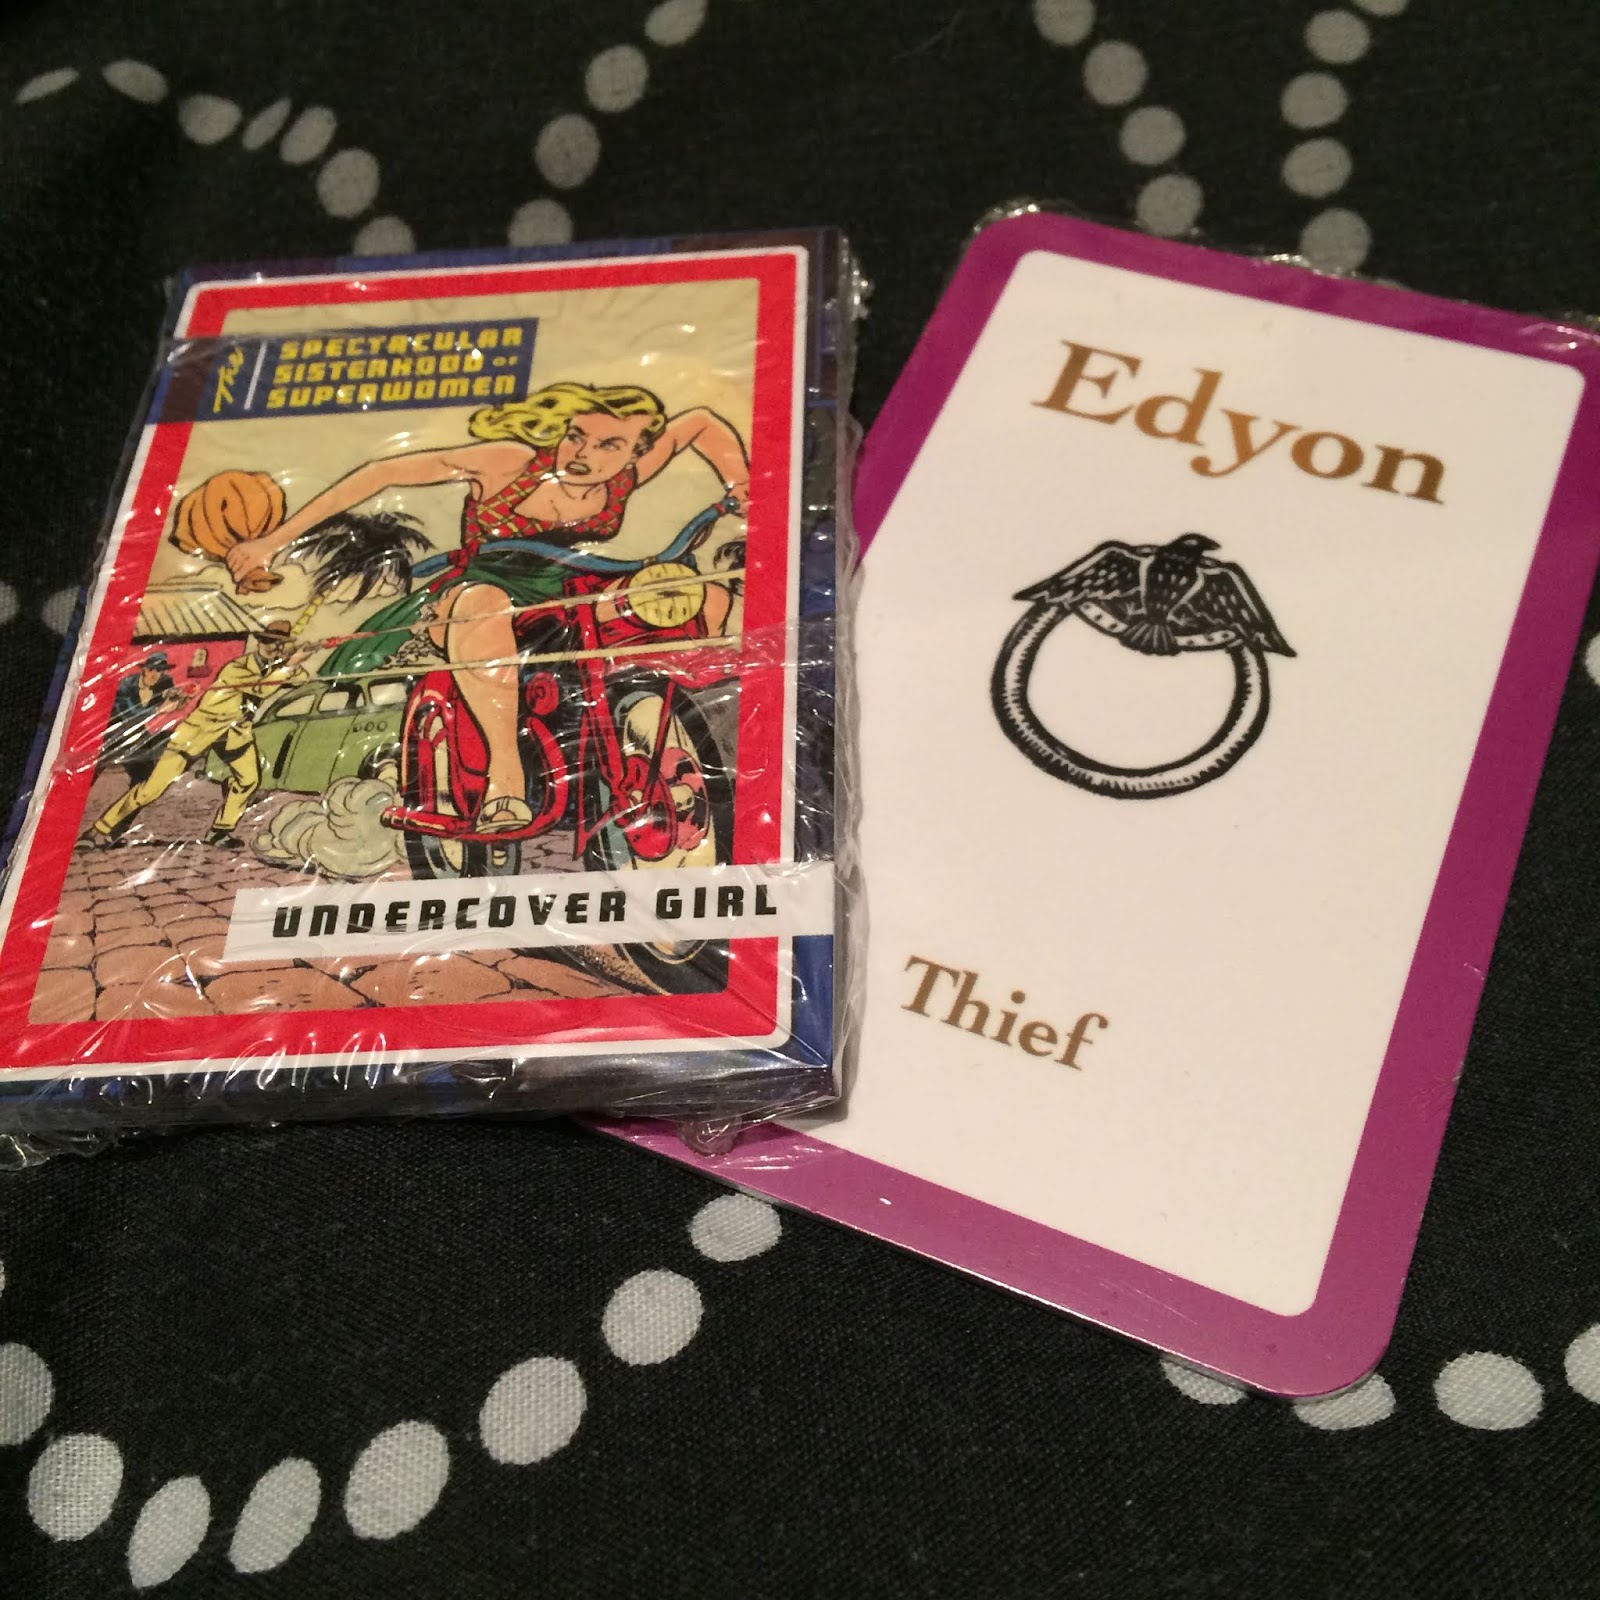 Trading cards for The Spectacular Sisterhood of Superwomen and Smoke Thieves